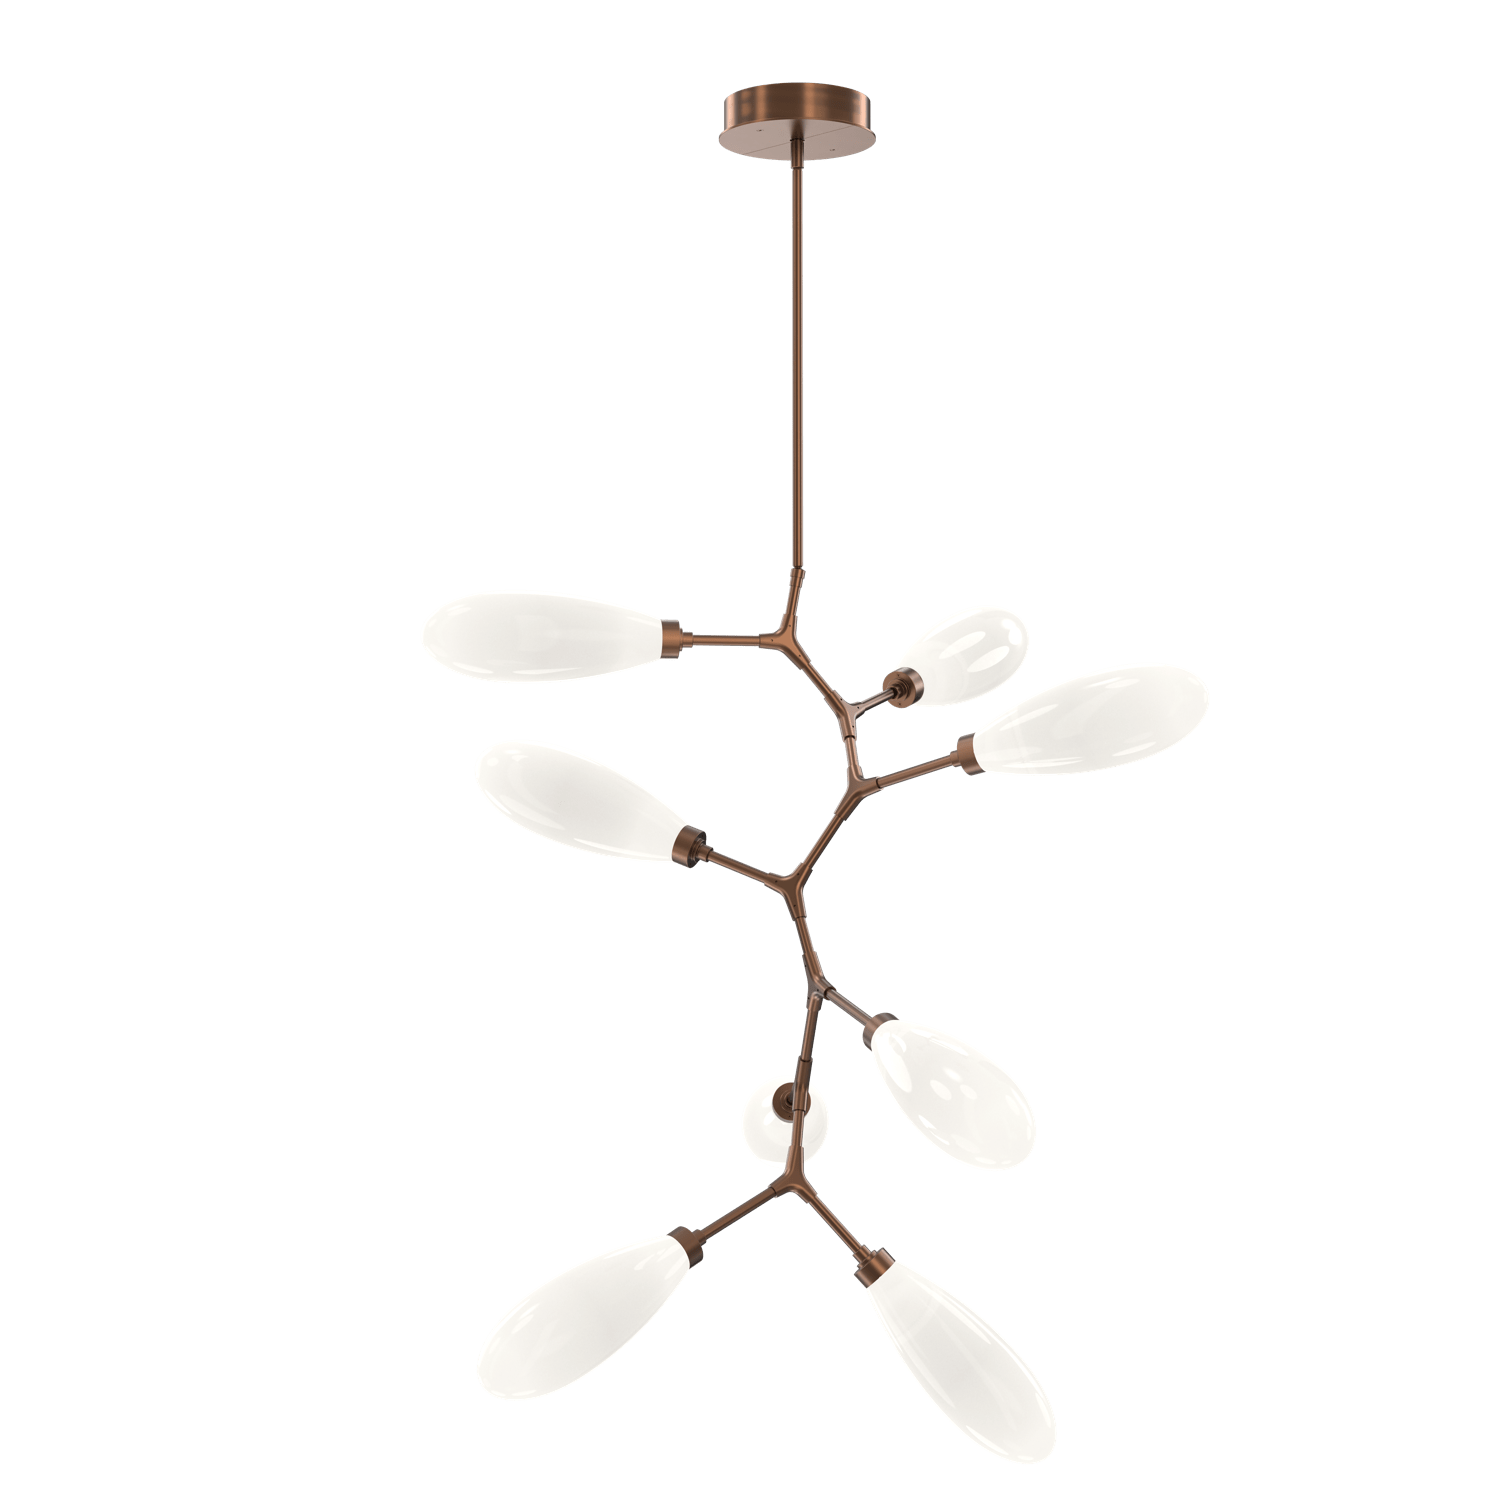 CHB0071-VB-RB-WL-LL-Hammerton-Studio-Fiori-8-light-organic-vine-chandelier-with-oil-rubbed-bronze-finish-and-opal-white-glass-shades-and-LED-lamping